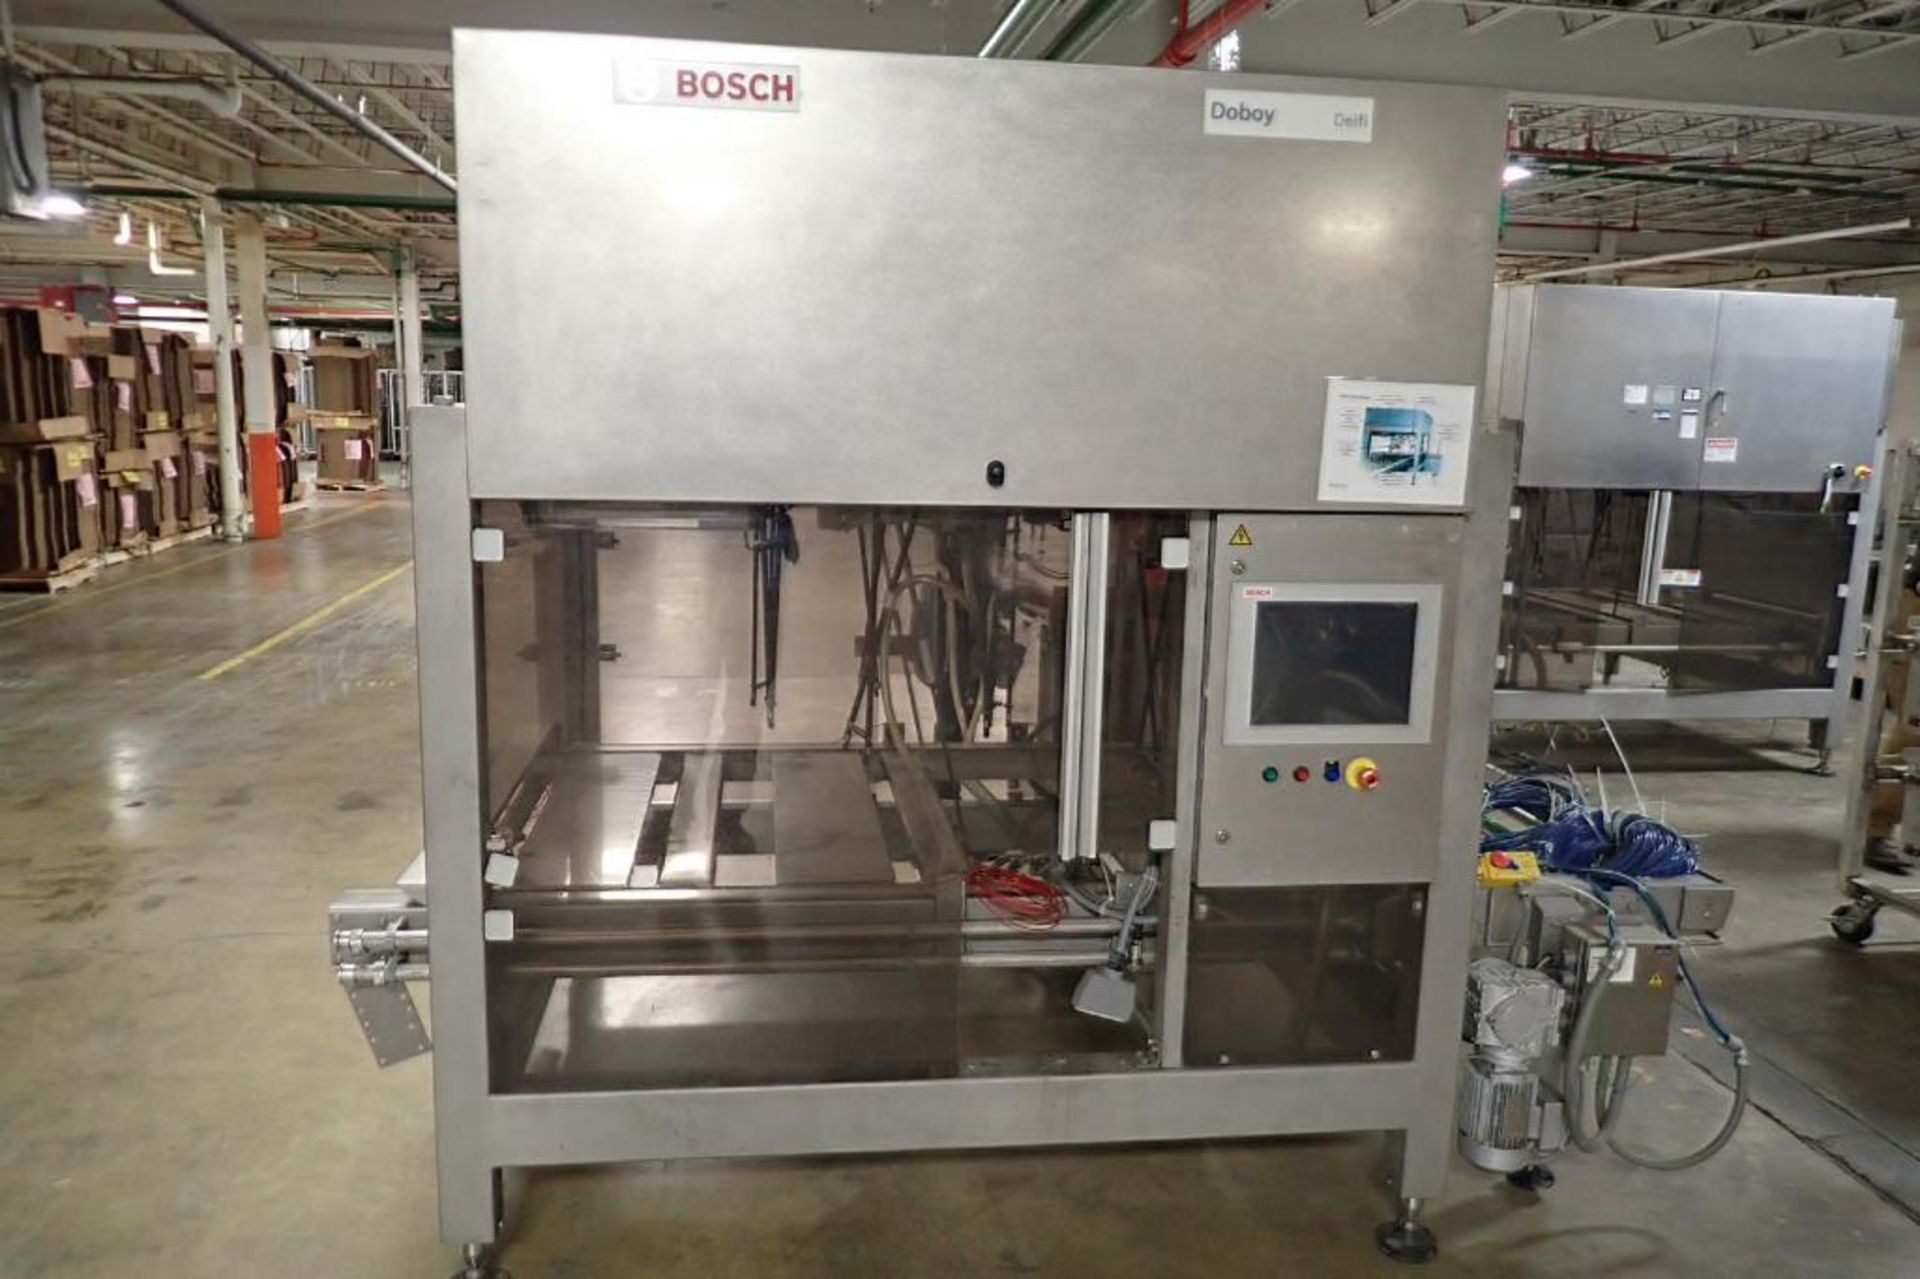 Bosch Doboy delfi feed placer {Located in Indianapolis, IN}